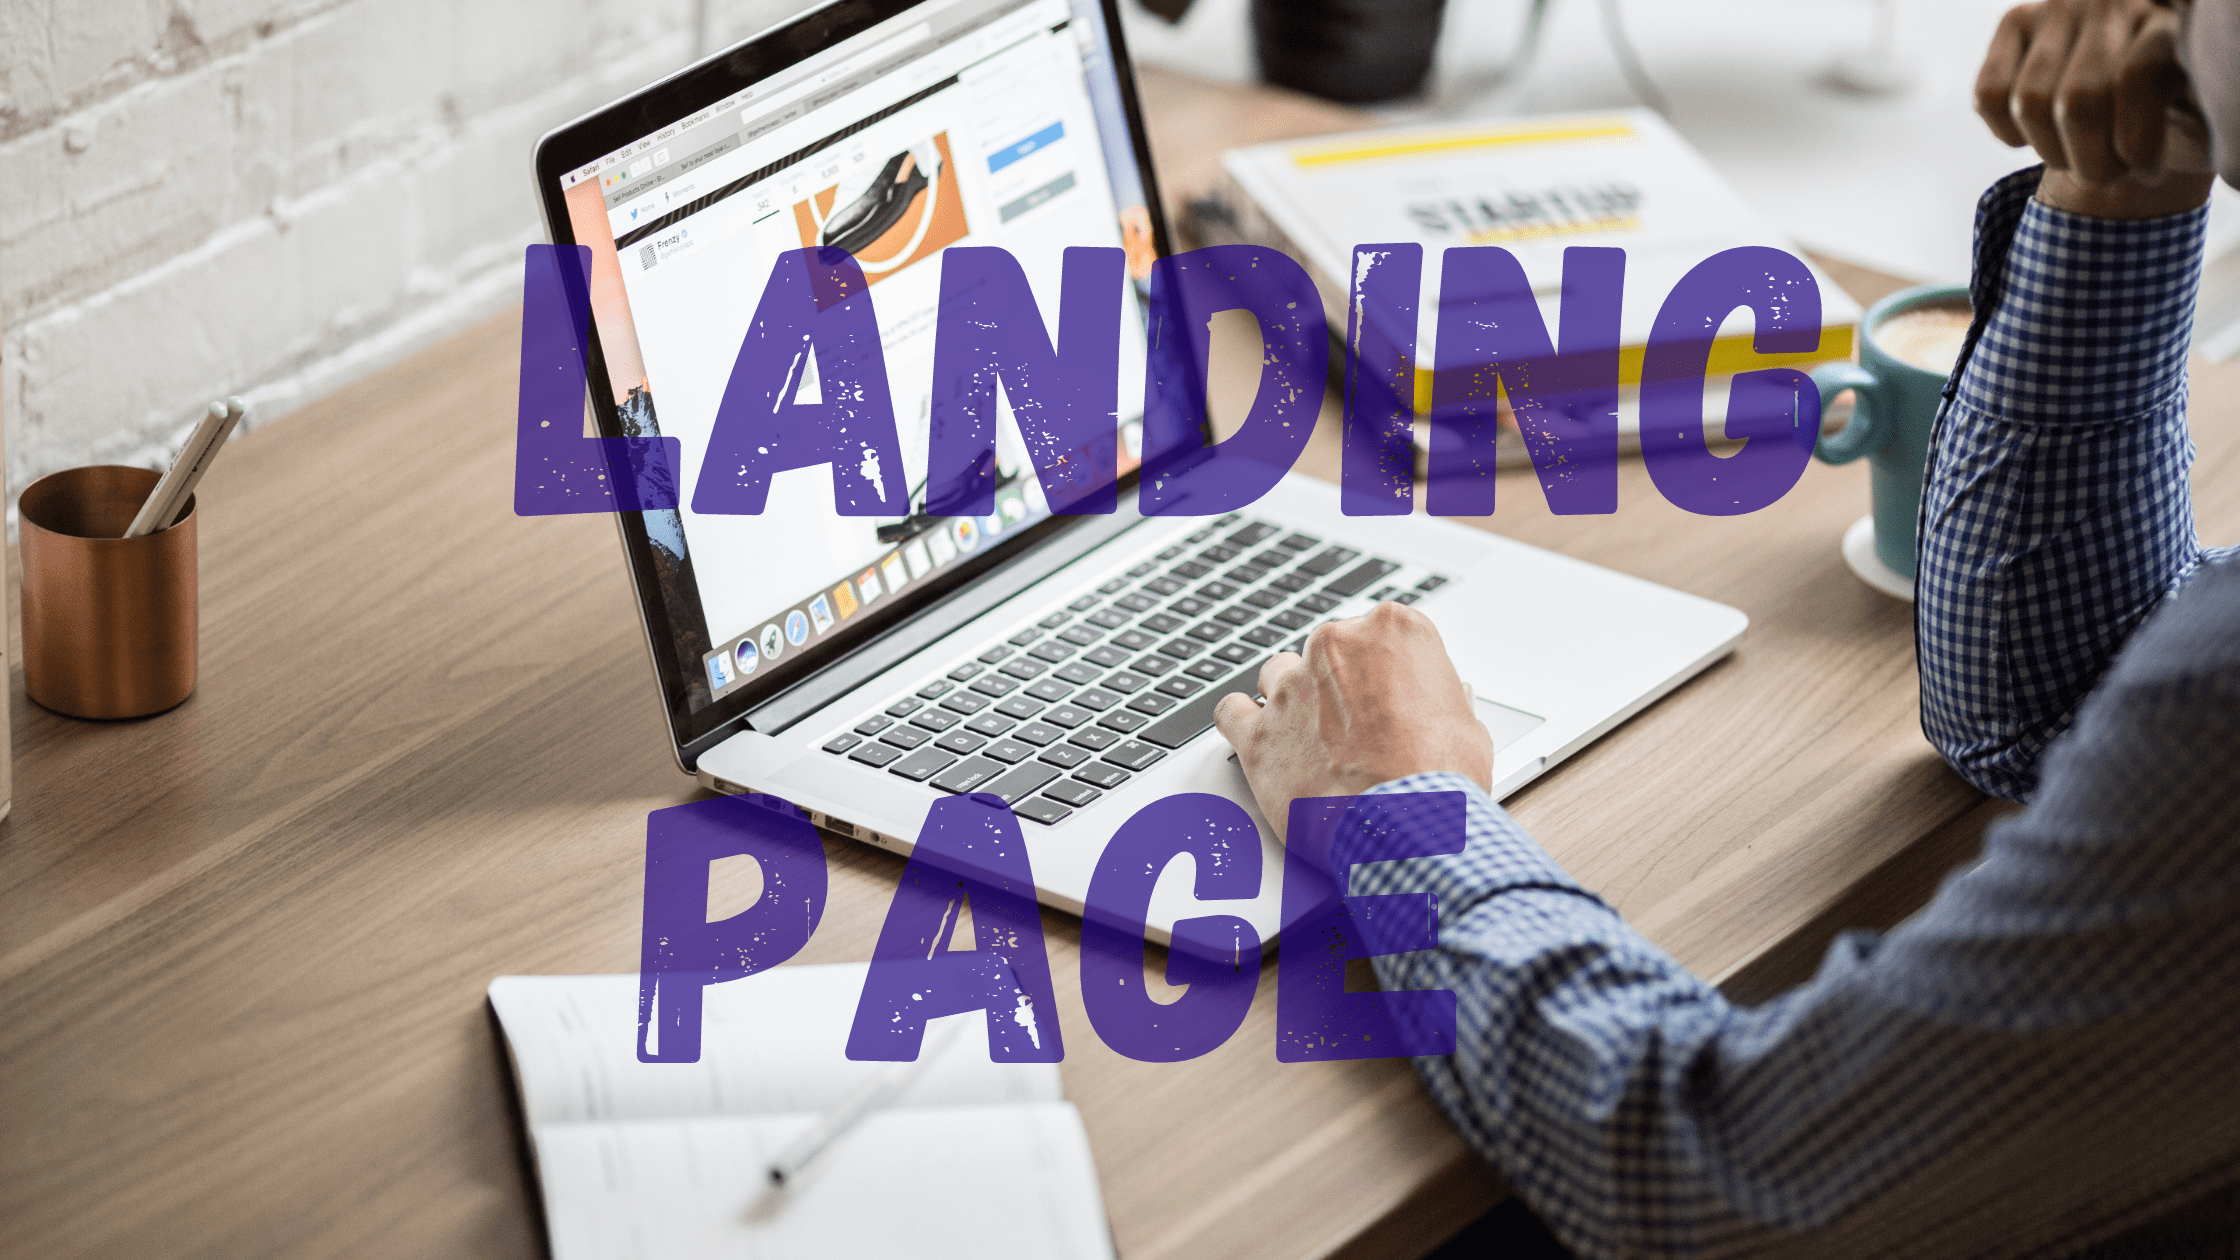 COMMENT CREER UNE LANDING PAGE ?